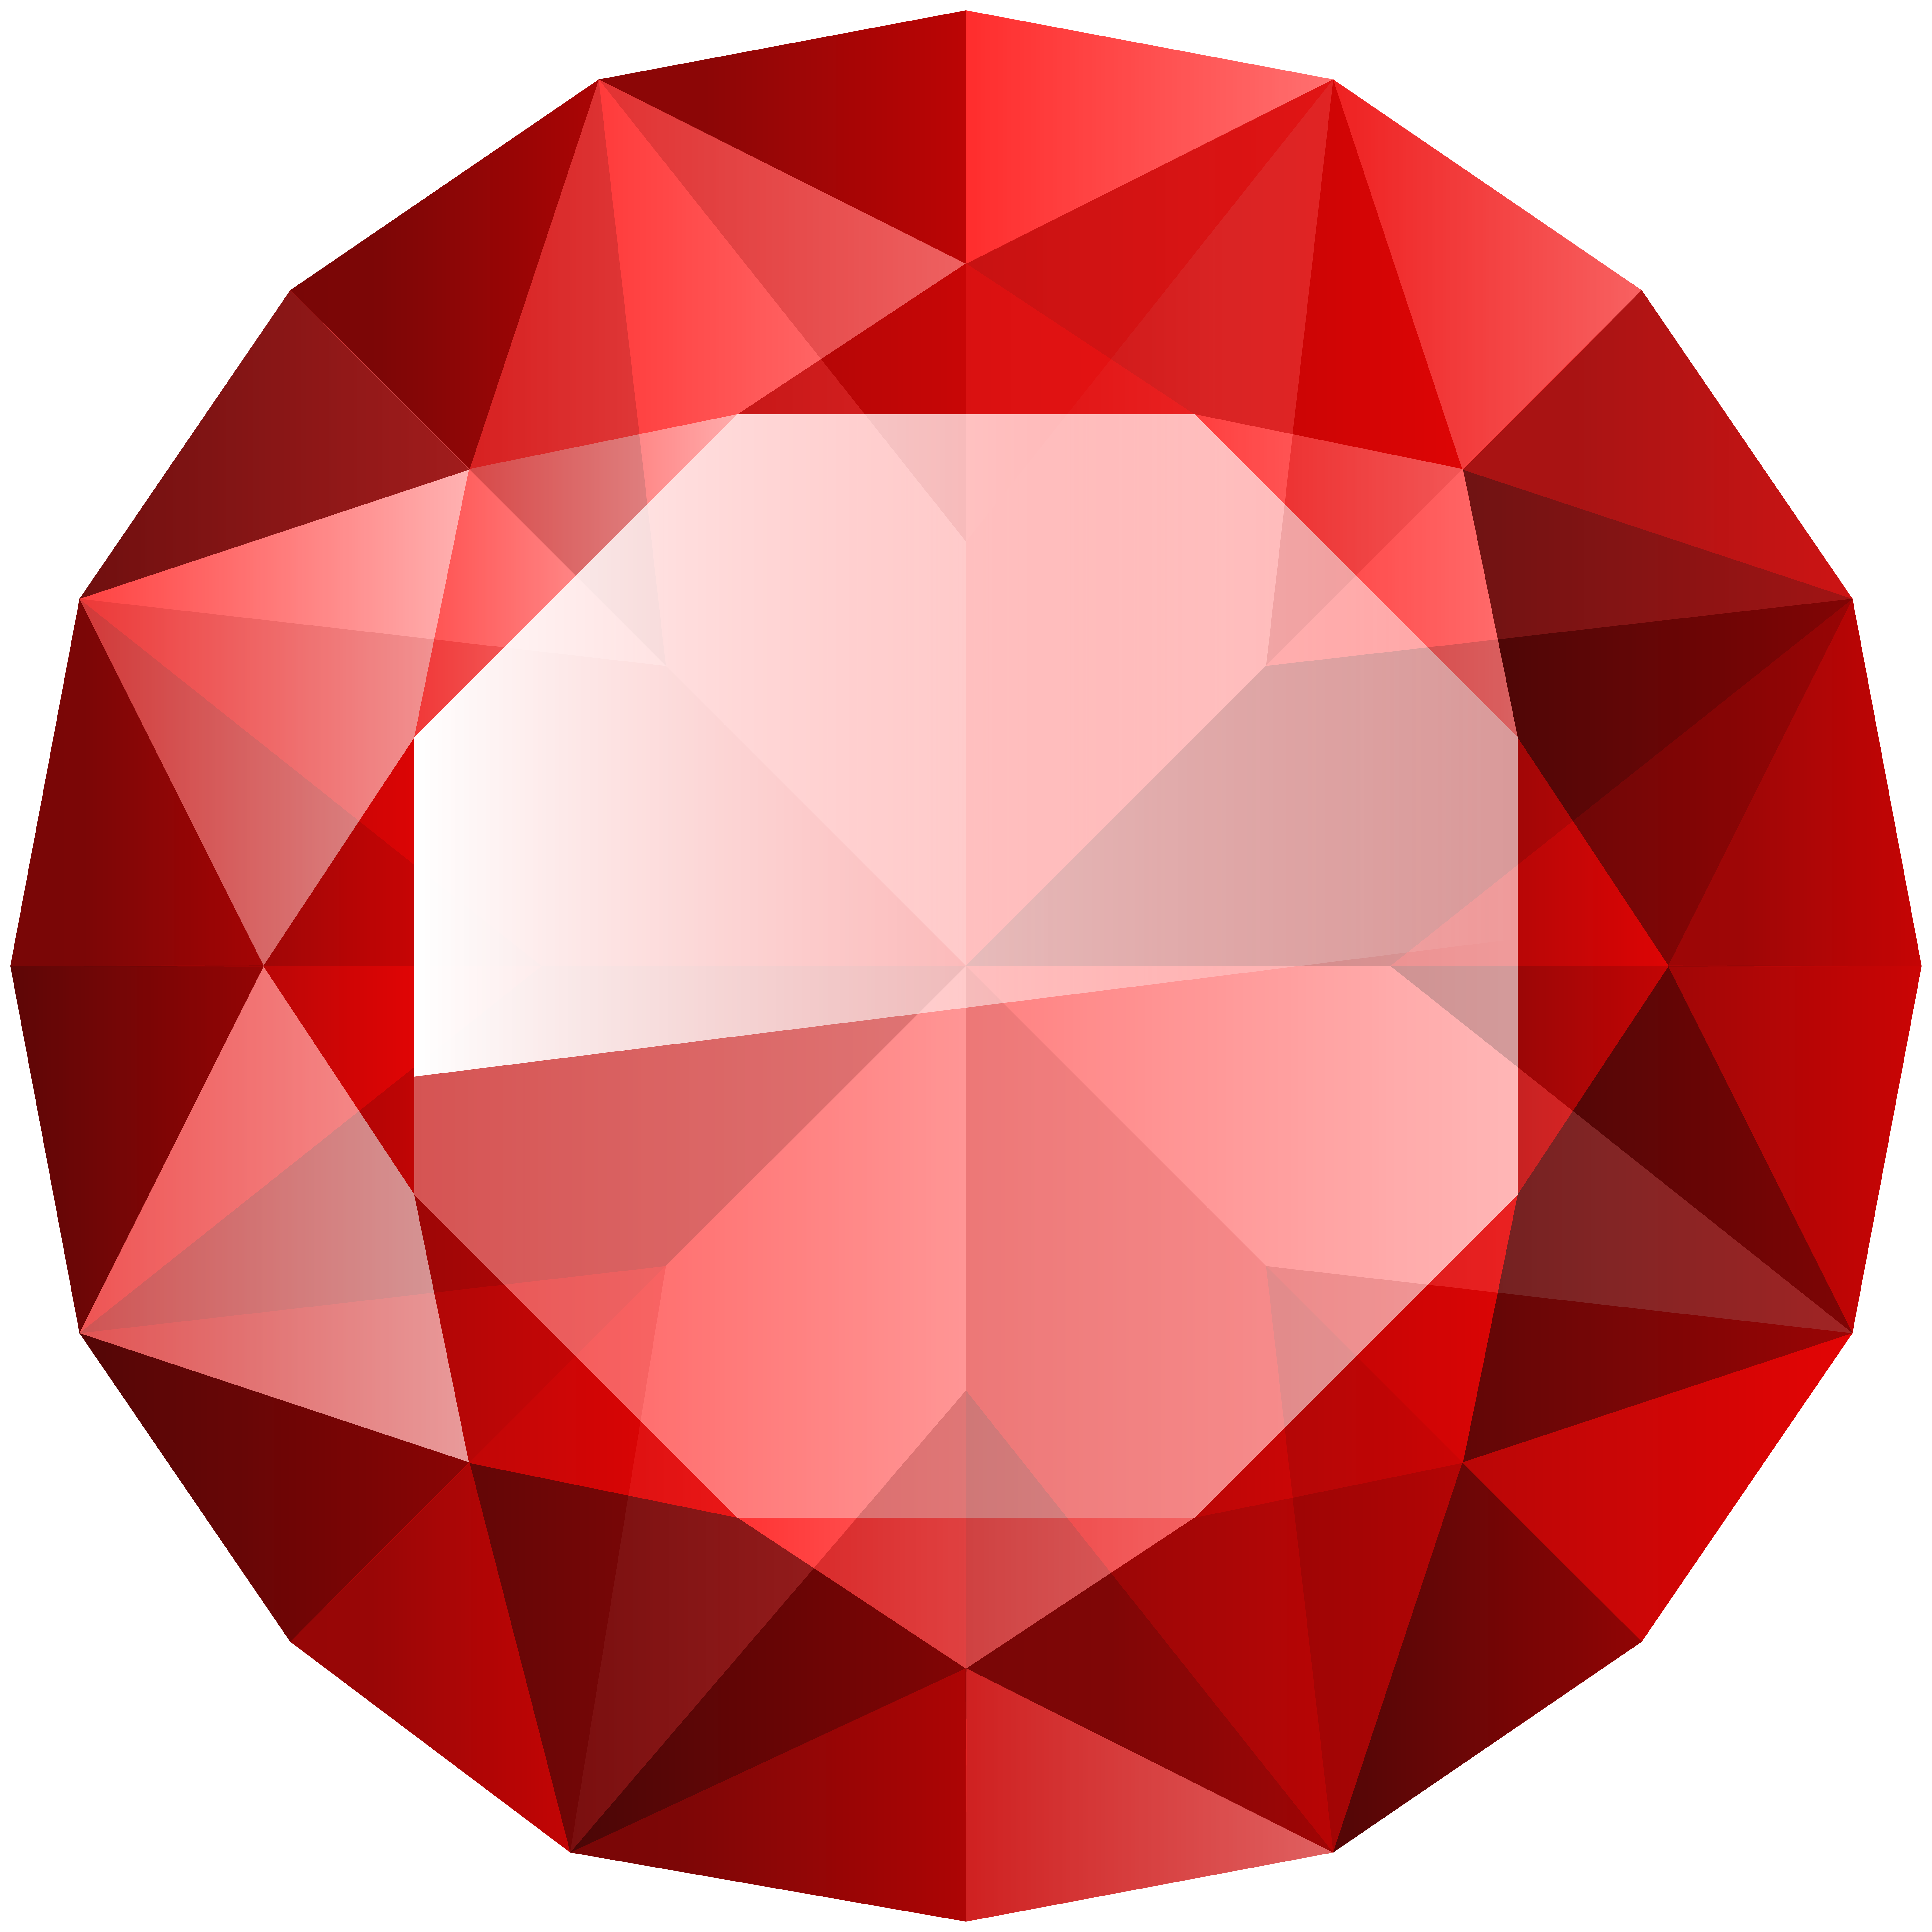 Red Diamond Transparent Clip Art Image Quality Image And Transparent PNG Free Clipart